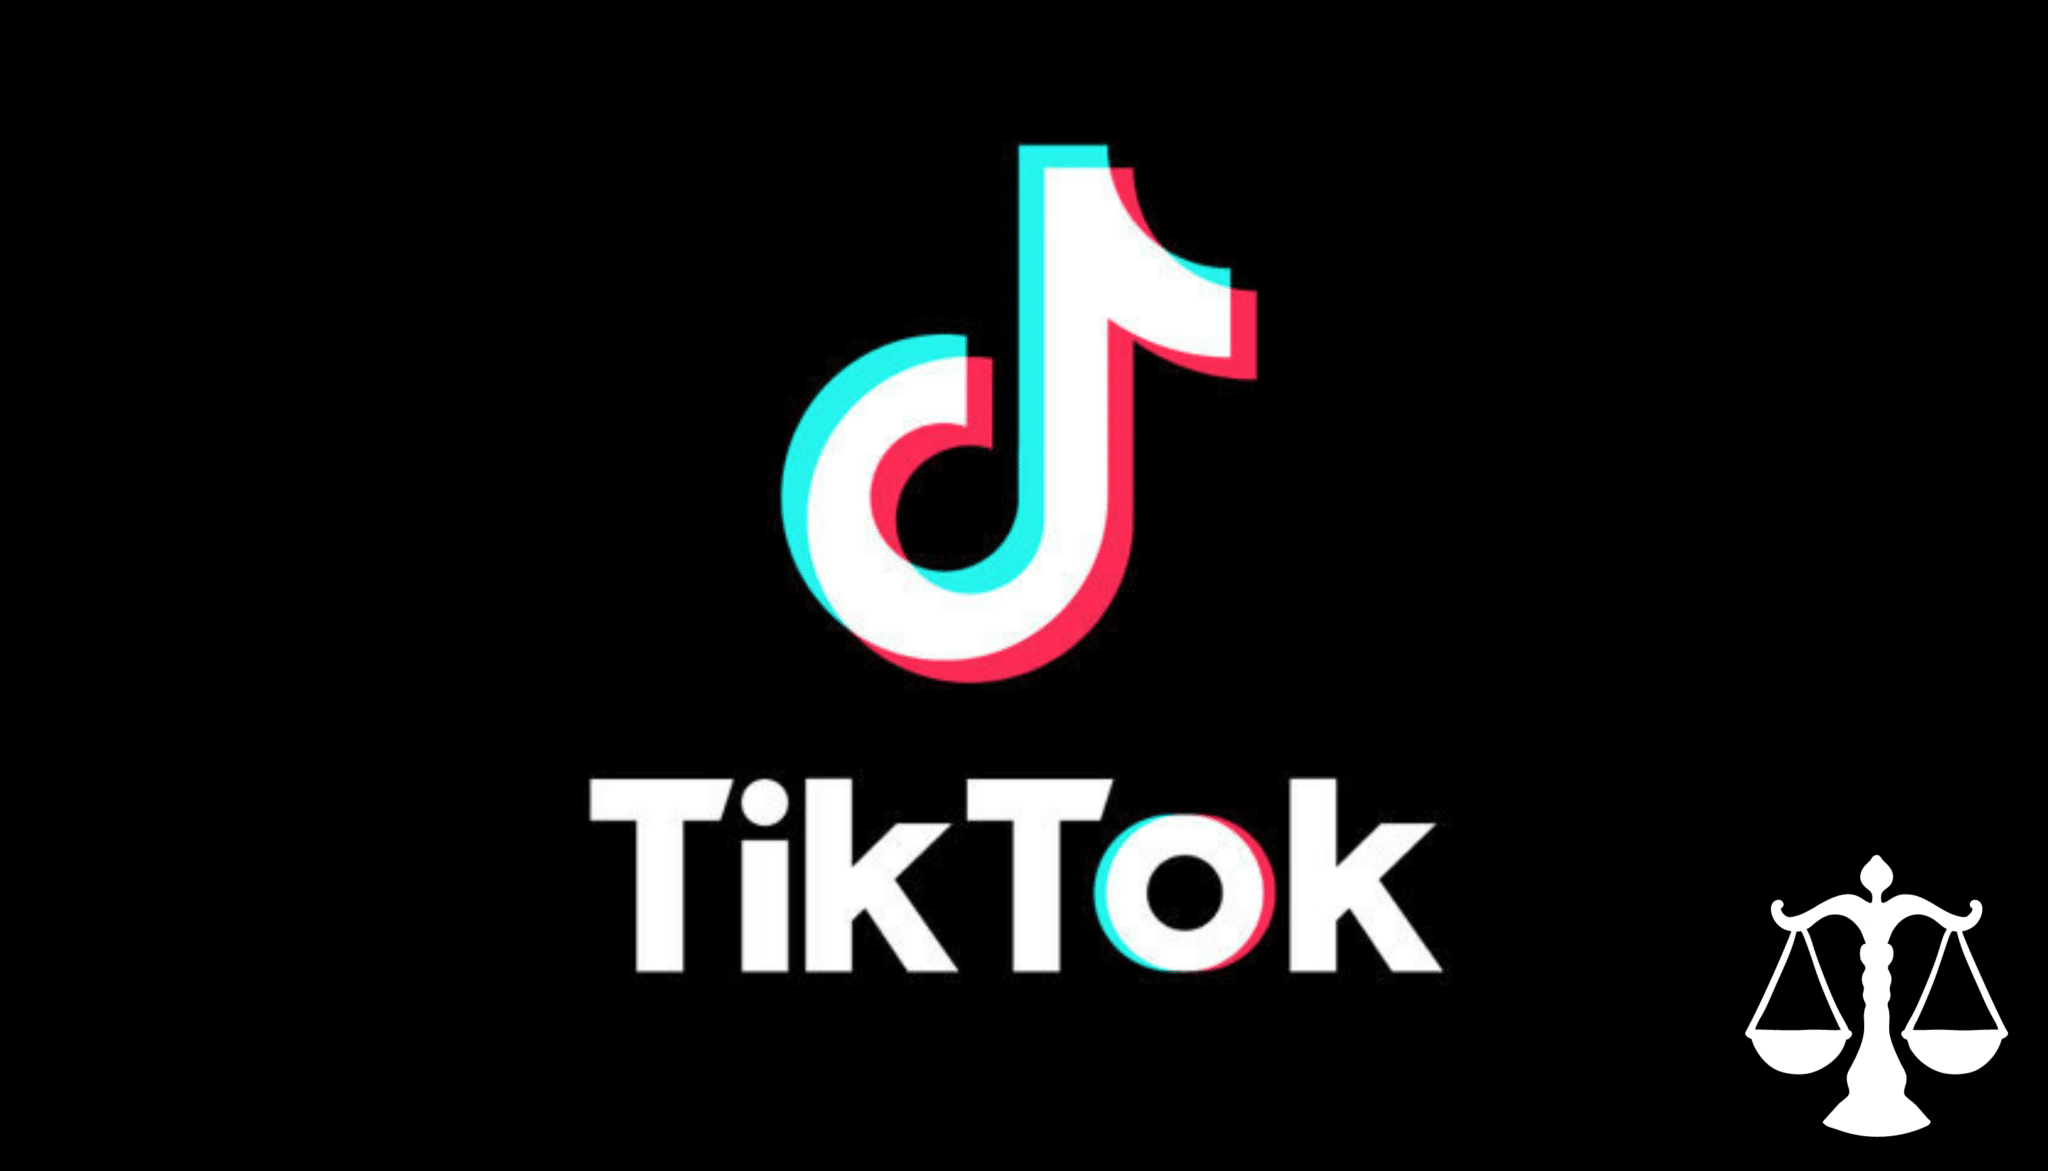 TikTok highlights its value to brands and search experience